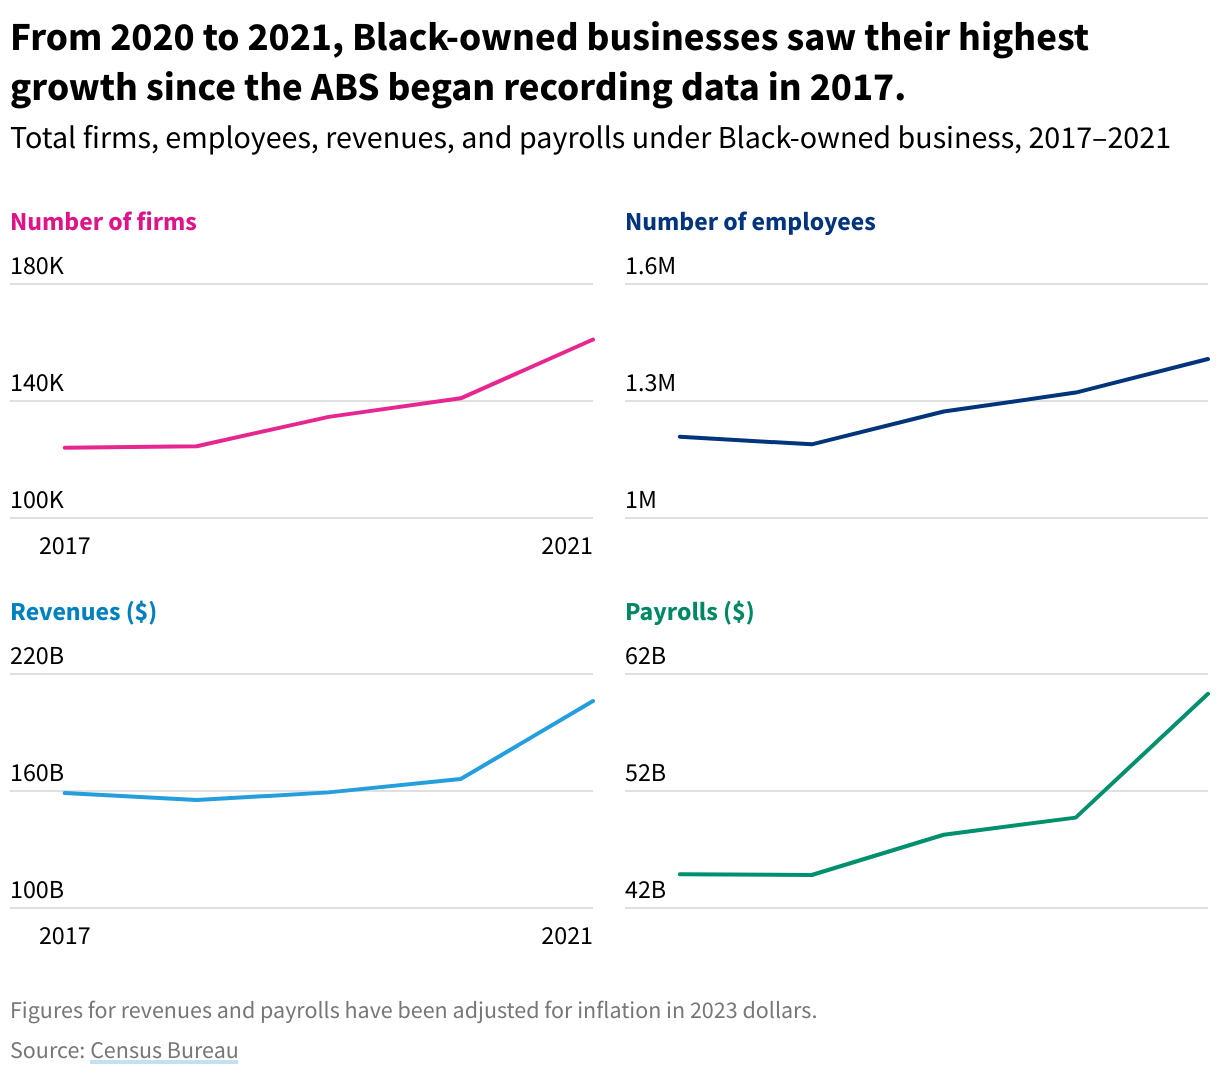 Multiple line charts illustrating how Black-owned businesses have grown in terms of total firms, number of employees, total revenues generated, and employee payrolls. 